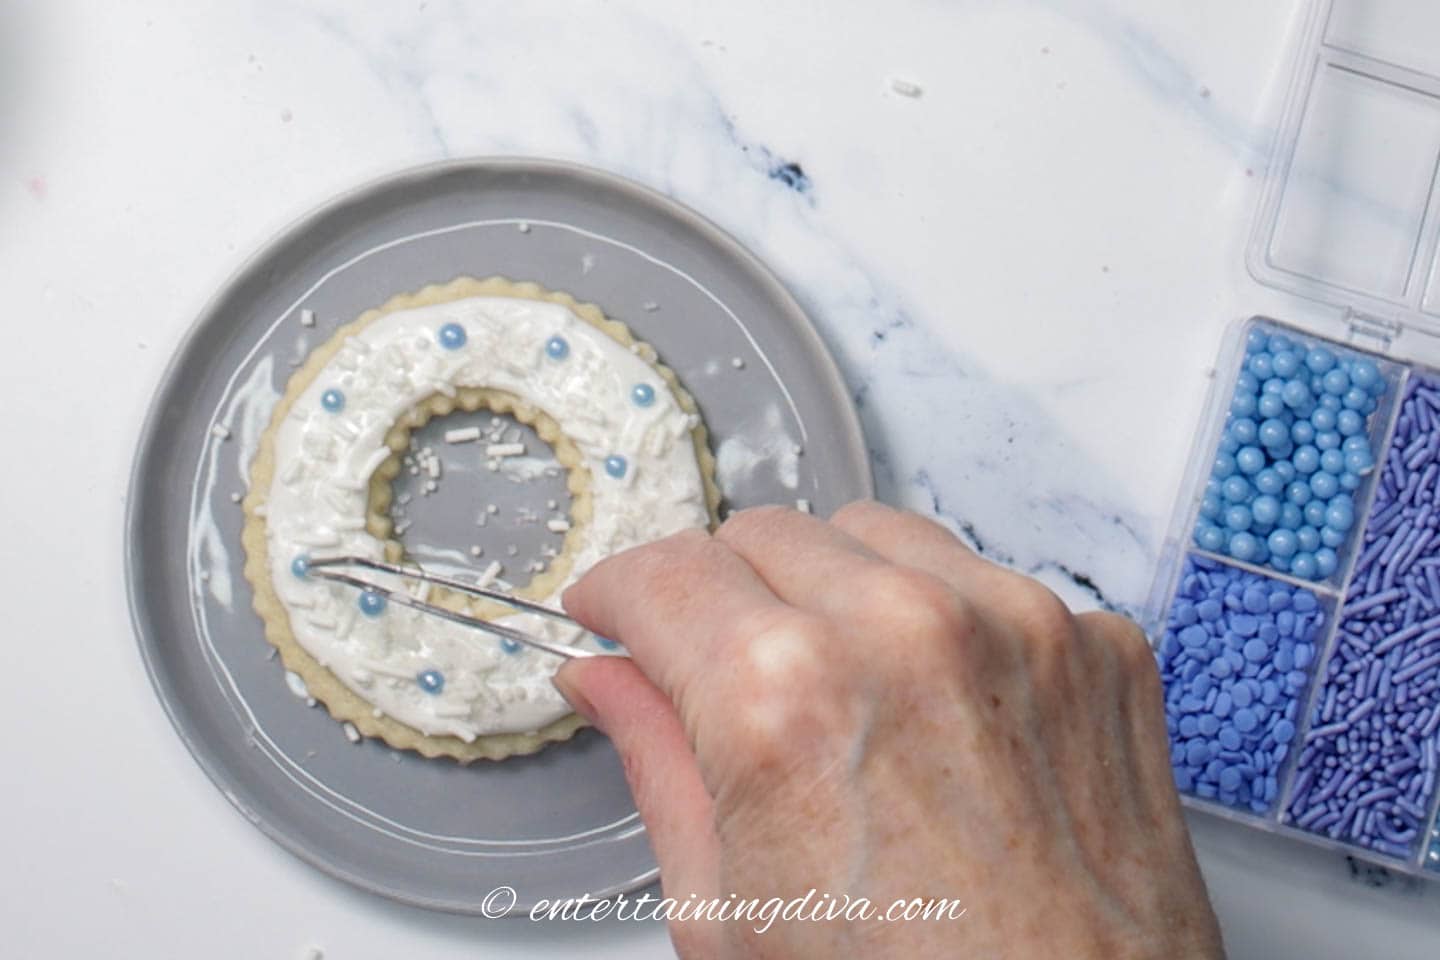 Using tweezers to place sugar balls on the wreath cookies